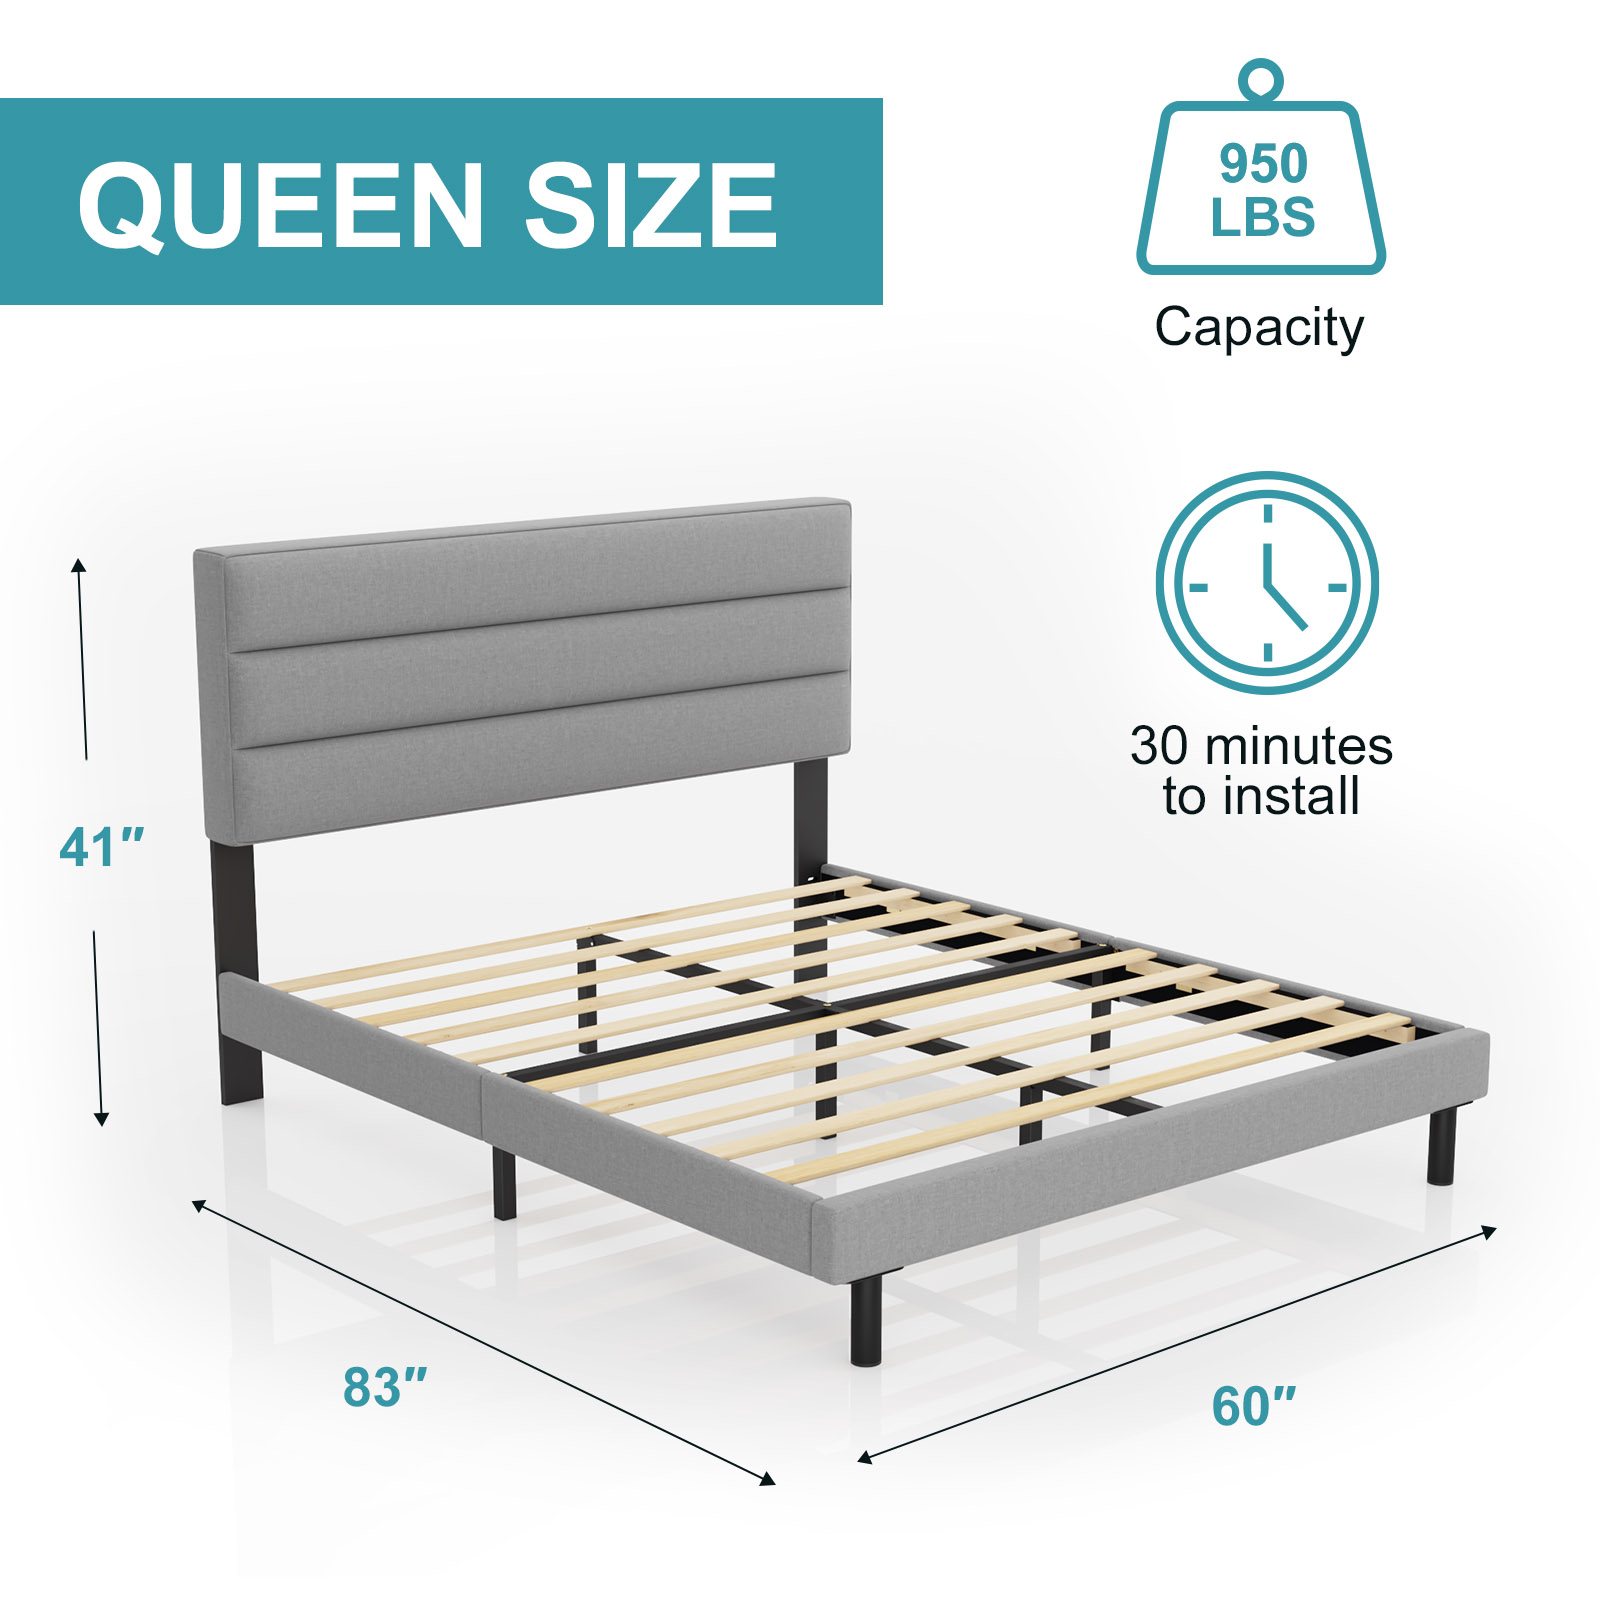 Queen Bed Frame, HAIIDE Queen Size Platform Bed with Wingback Fabric Upholstered Headboard, Light Gray - image 5 of 8